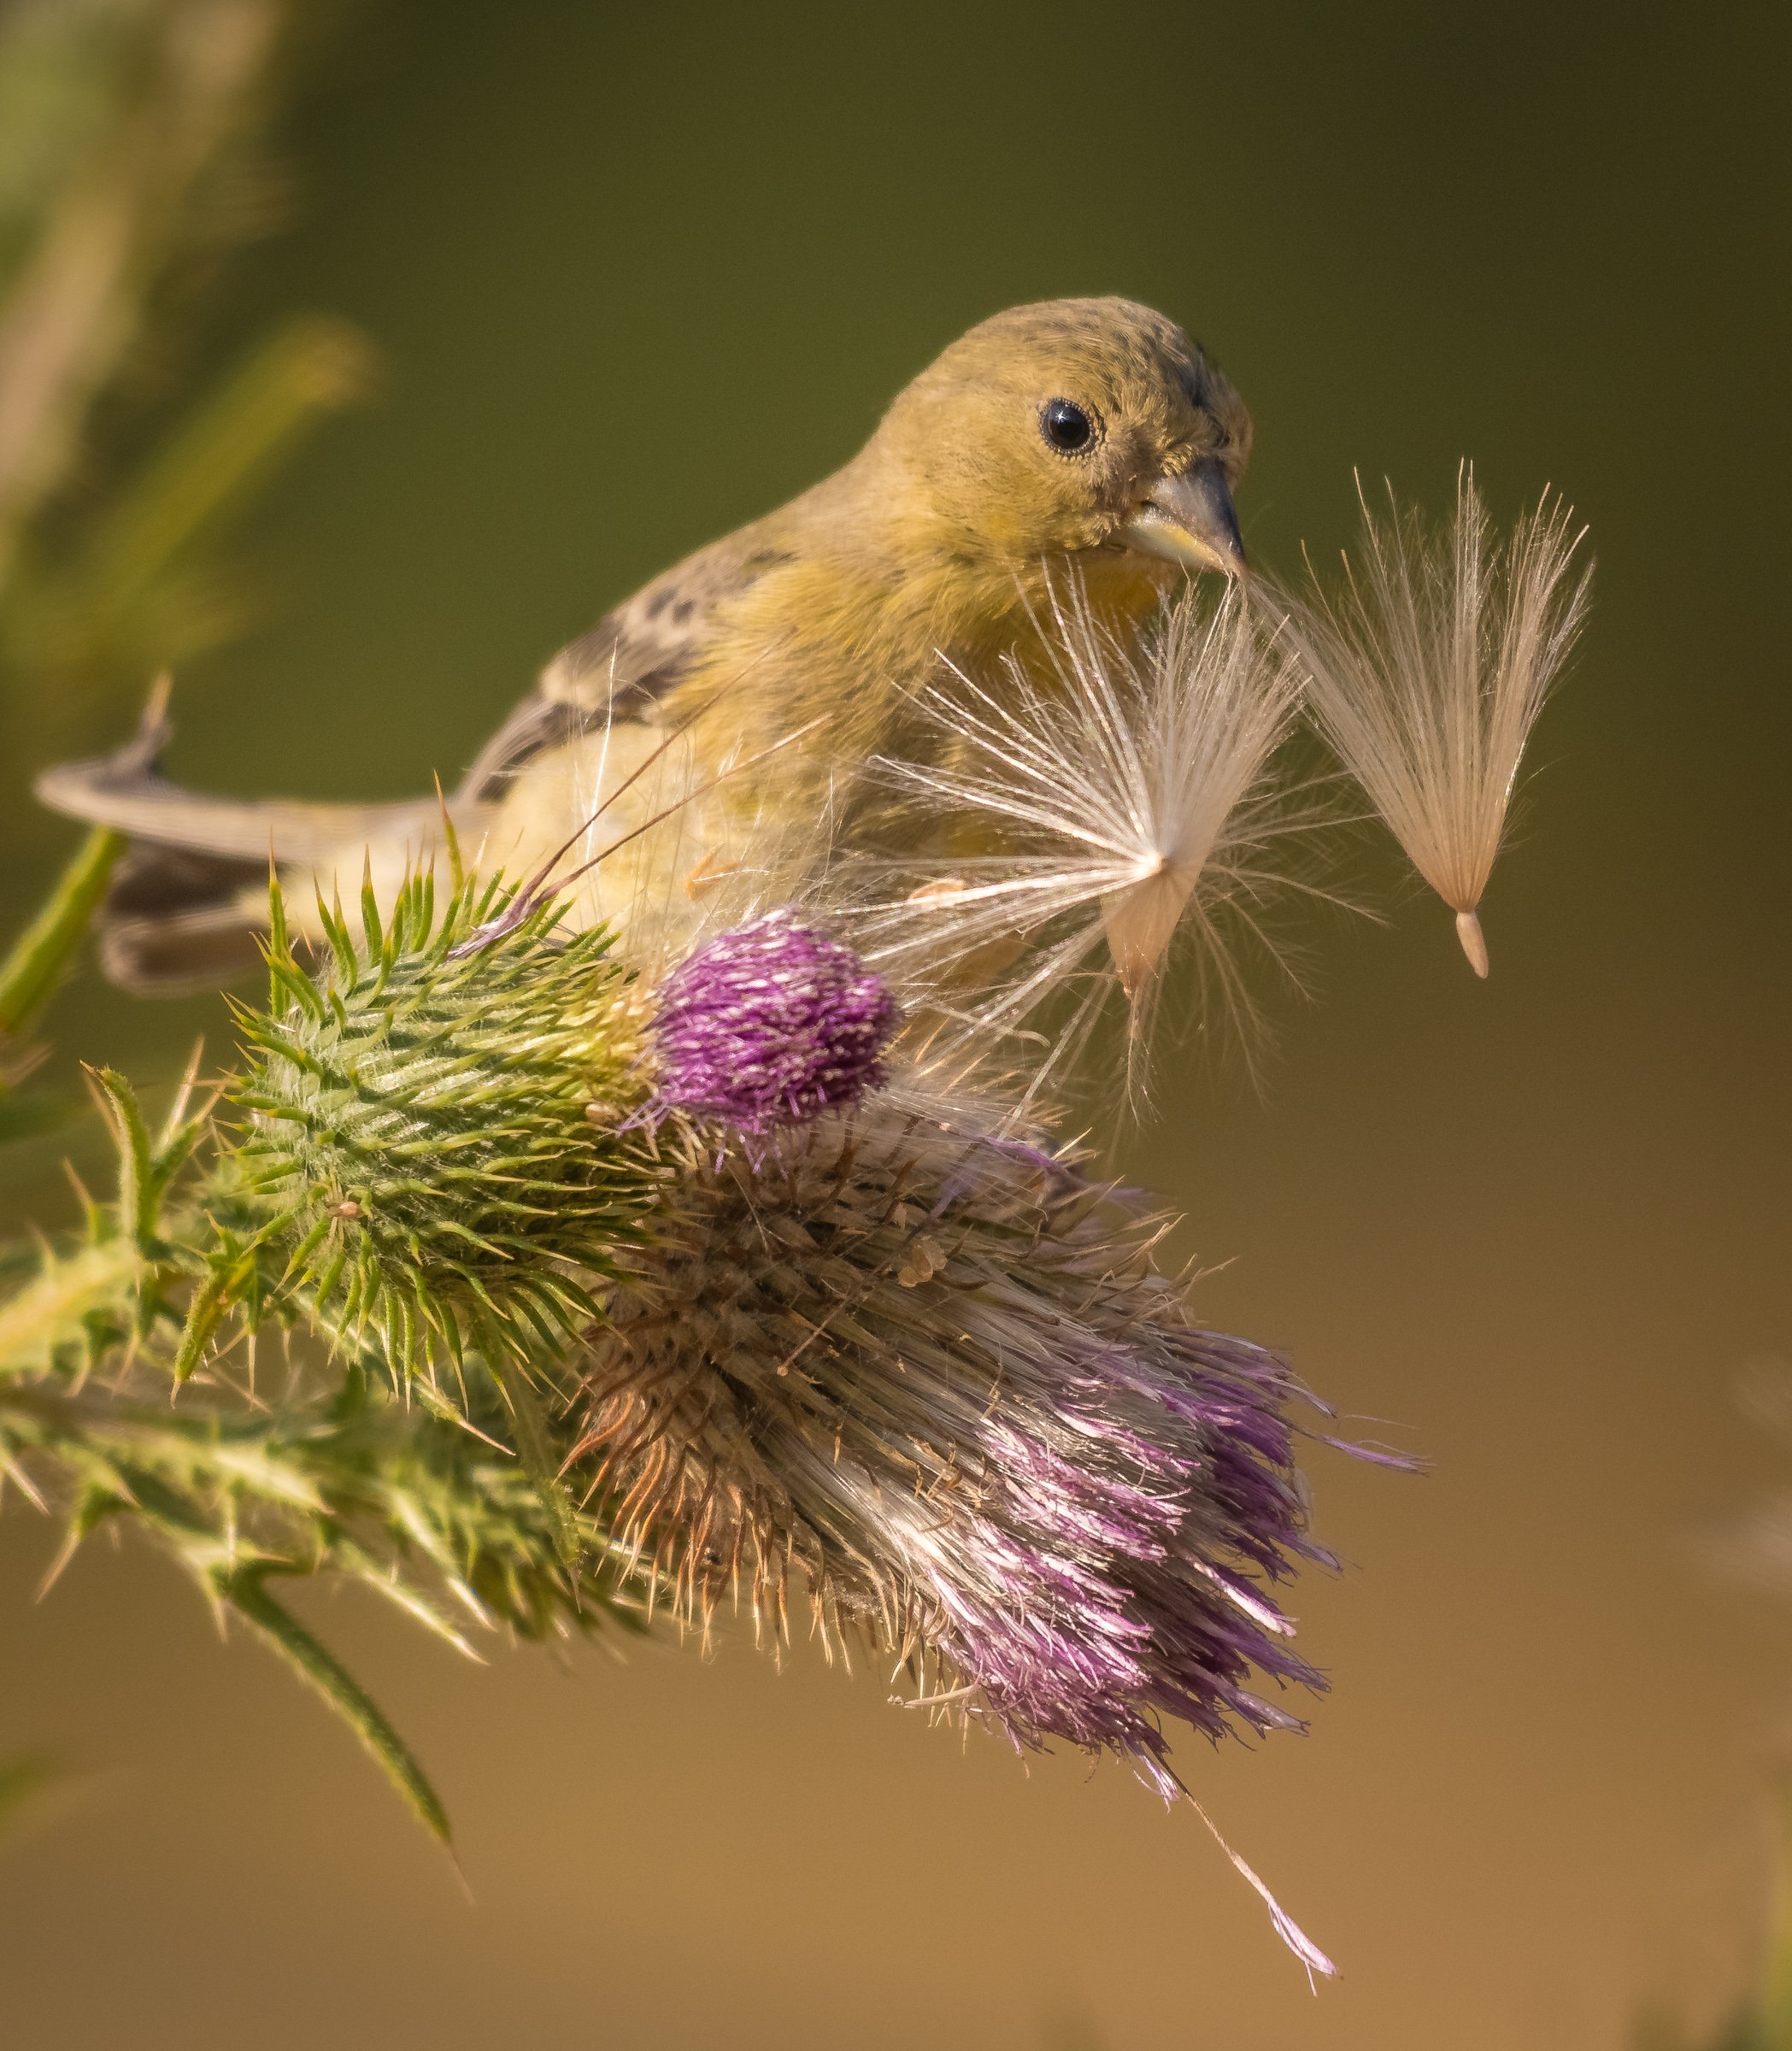 Female Goldfinch on Thistle by Mercury Freedom